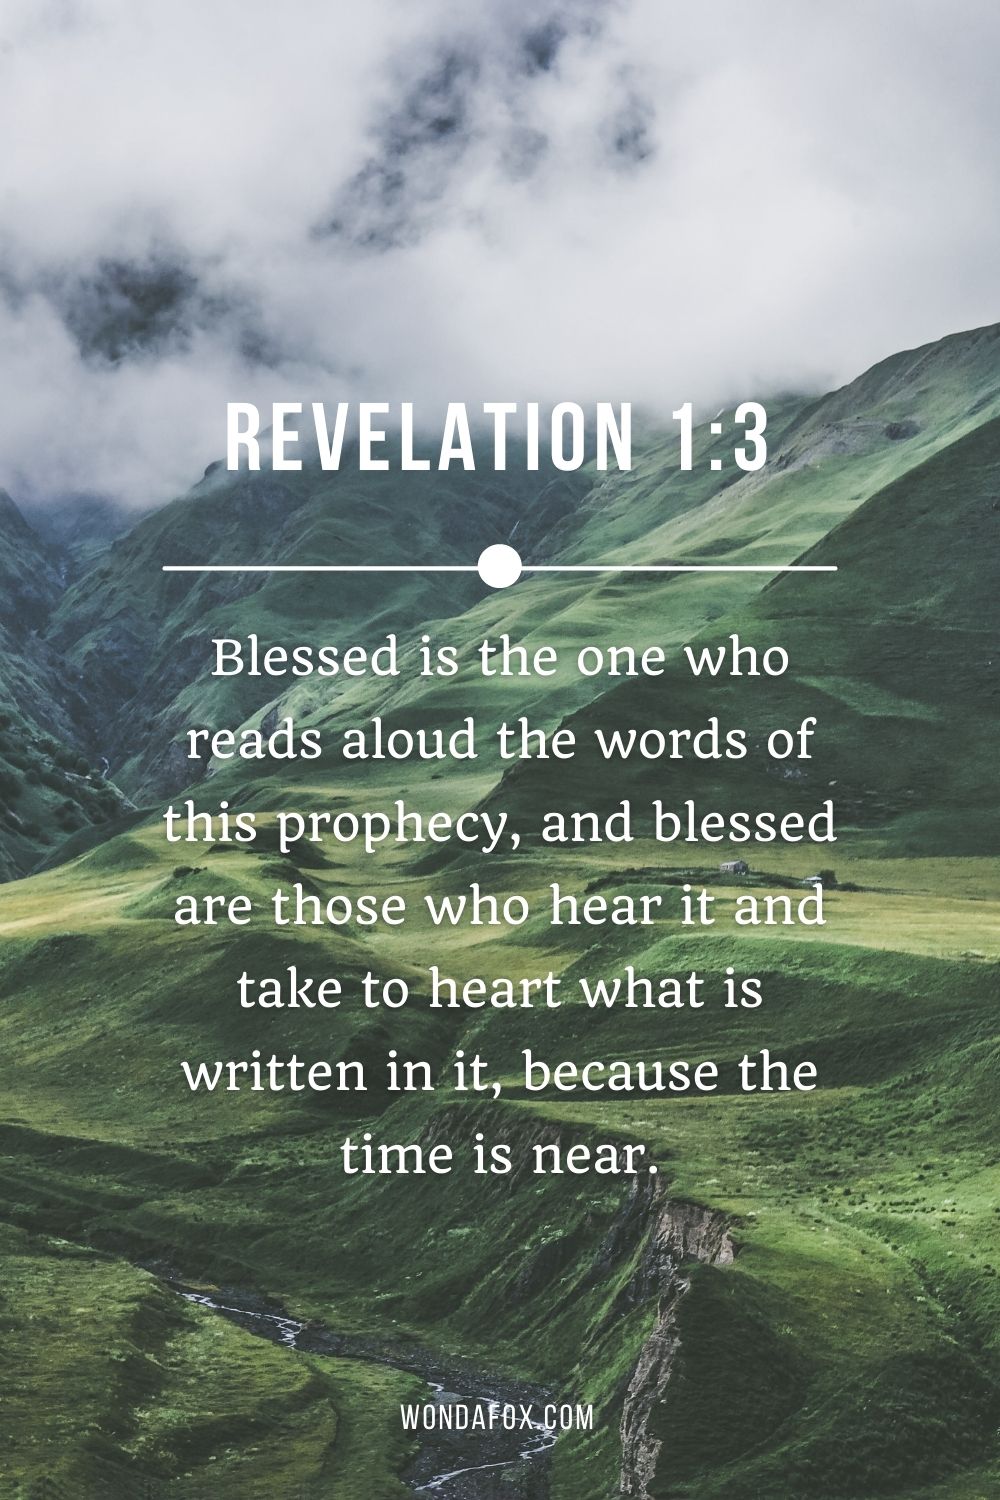 Blessed is the one who reads aloud the words of this prophecy, and blessed are those who hear it and take to heart what is written in it, because the time is near.